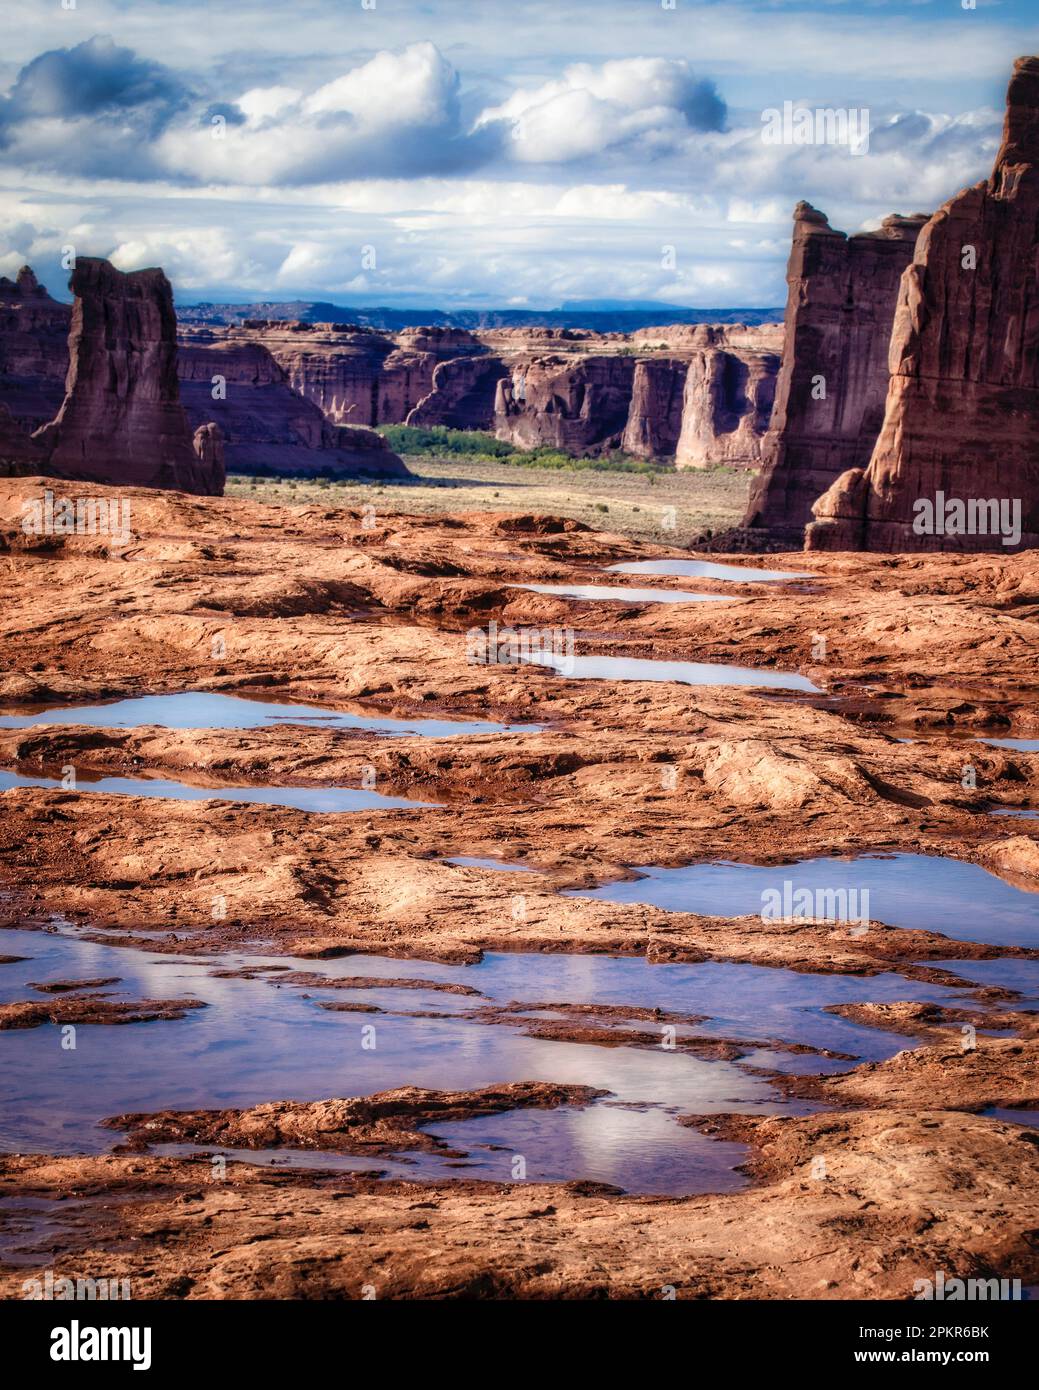 Puddles fill the contours of the rock surface in a view toward Courthouse Wash in Arches National Park, Utah. Stock Photo